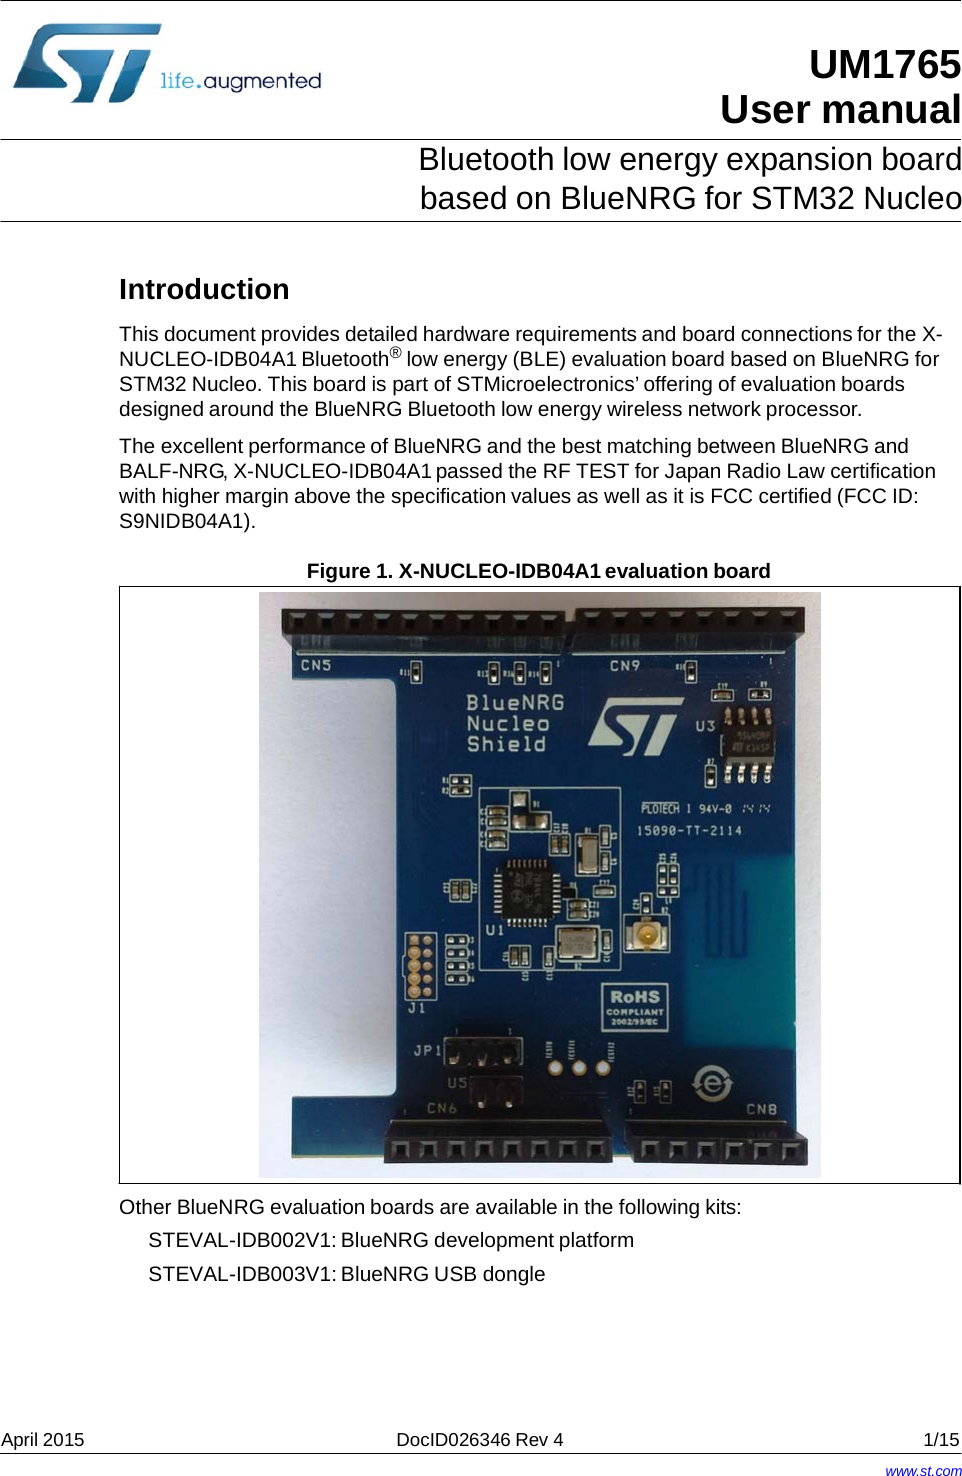  UM1765 User manual Bluetooth low energy expansion board based on BlueNRG for STM32 Nucleo Introduction This document provides detailed hardware requirements and board connections for the X- NUCLEO-IDB04A1 Bluetooth® low energy (BLE) evaluation board based on BlueNRG for STM32 Nucleo. This board is part of STMicroelectronics’ offering of evaluation boards designed around the BlueNRG Bluetooth low energy wireless network processor. The excellent performance of BlueNRG and the best matching between BlueNRG and BALF-NRG, X-NUCLEO-IDB04A1 passed the RF TEST for Japan Radio Law certification with higher margin above the specification values as well as it is FCC certified (FCC ID: S9NIDB04A1). Figure 1. X-NUCLEO-IDB04A1 evaluation board  Other BlueNRG evaluation boards are available in the following kits: STEVAL-IDB002V1: BlueNRG development platform STEVAL-IDB003V1: BlueNRG USB dongle April 2015  DocID026346 Rev 4  1/15 www.st.com 